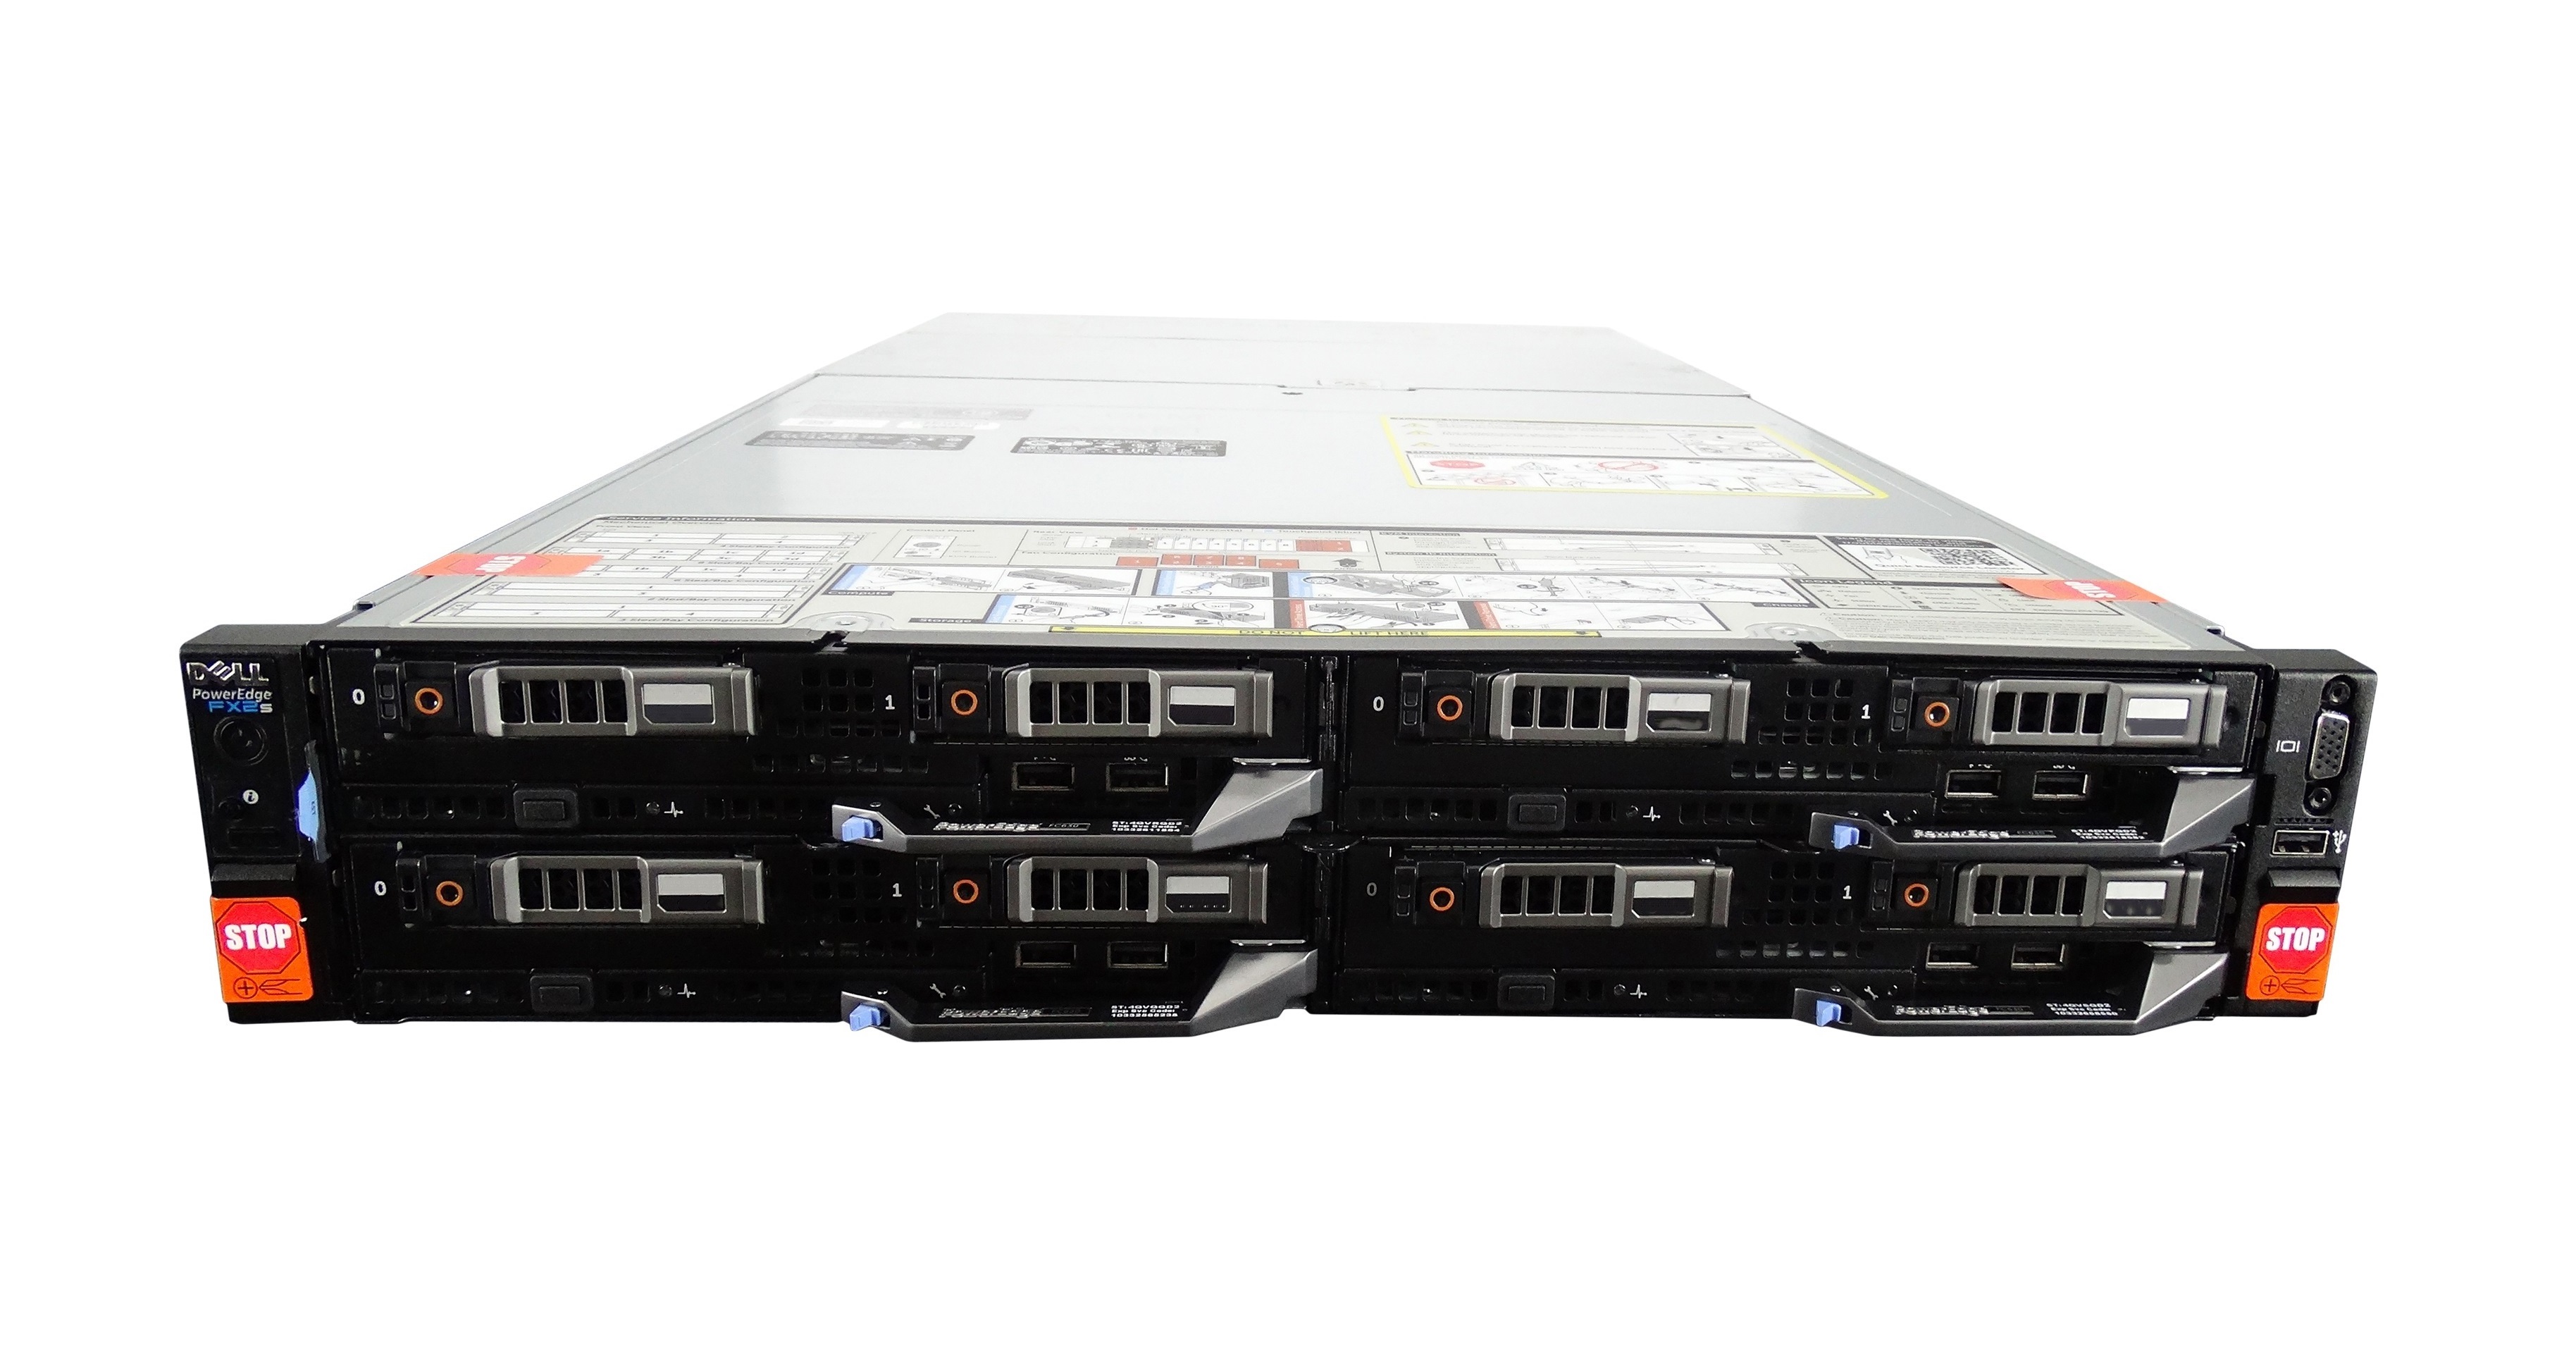 Chassis Management Controller Version 2.30 For PowerEdge FX2